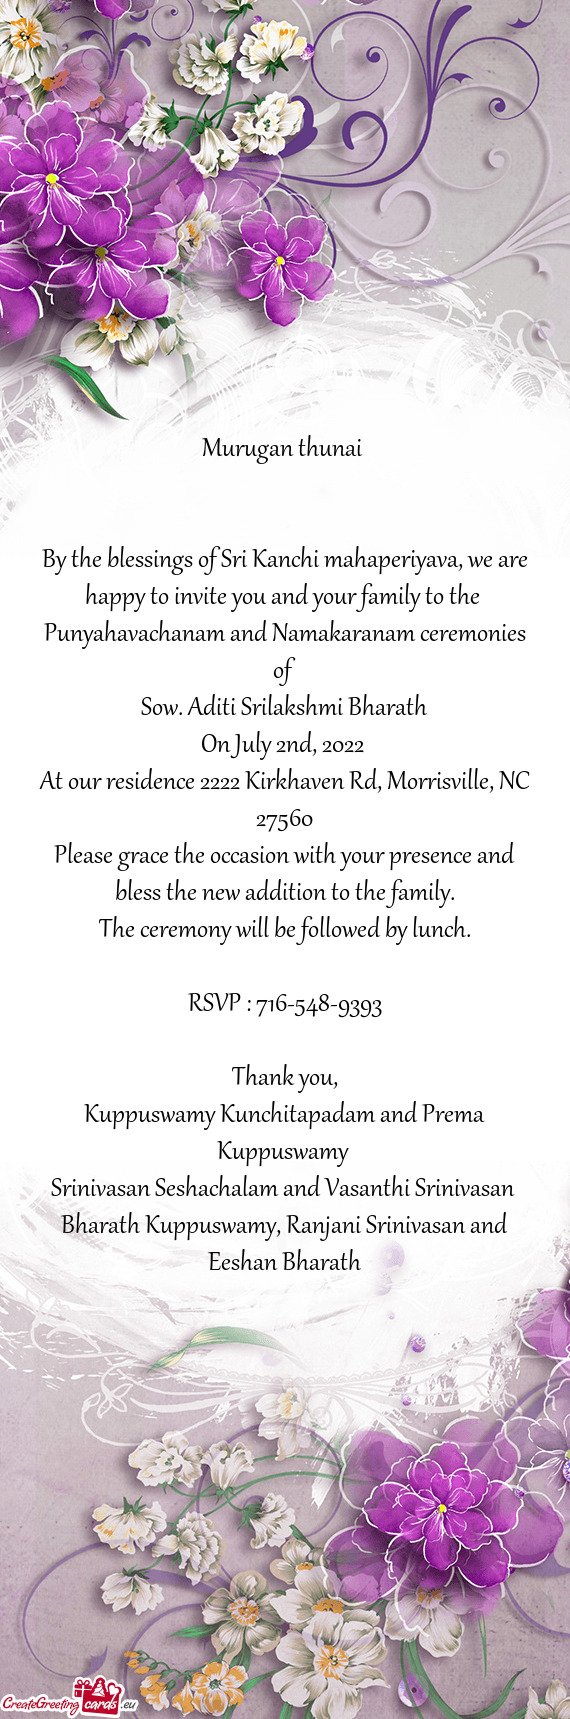 By the blessings of Sri Kanchi mahaperiyava, we are happy to invite you and your family to the